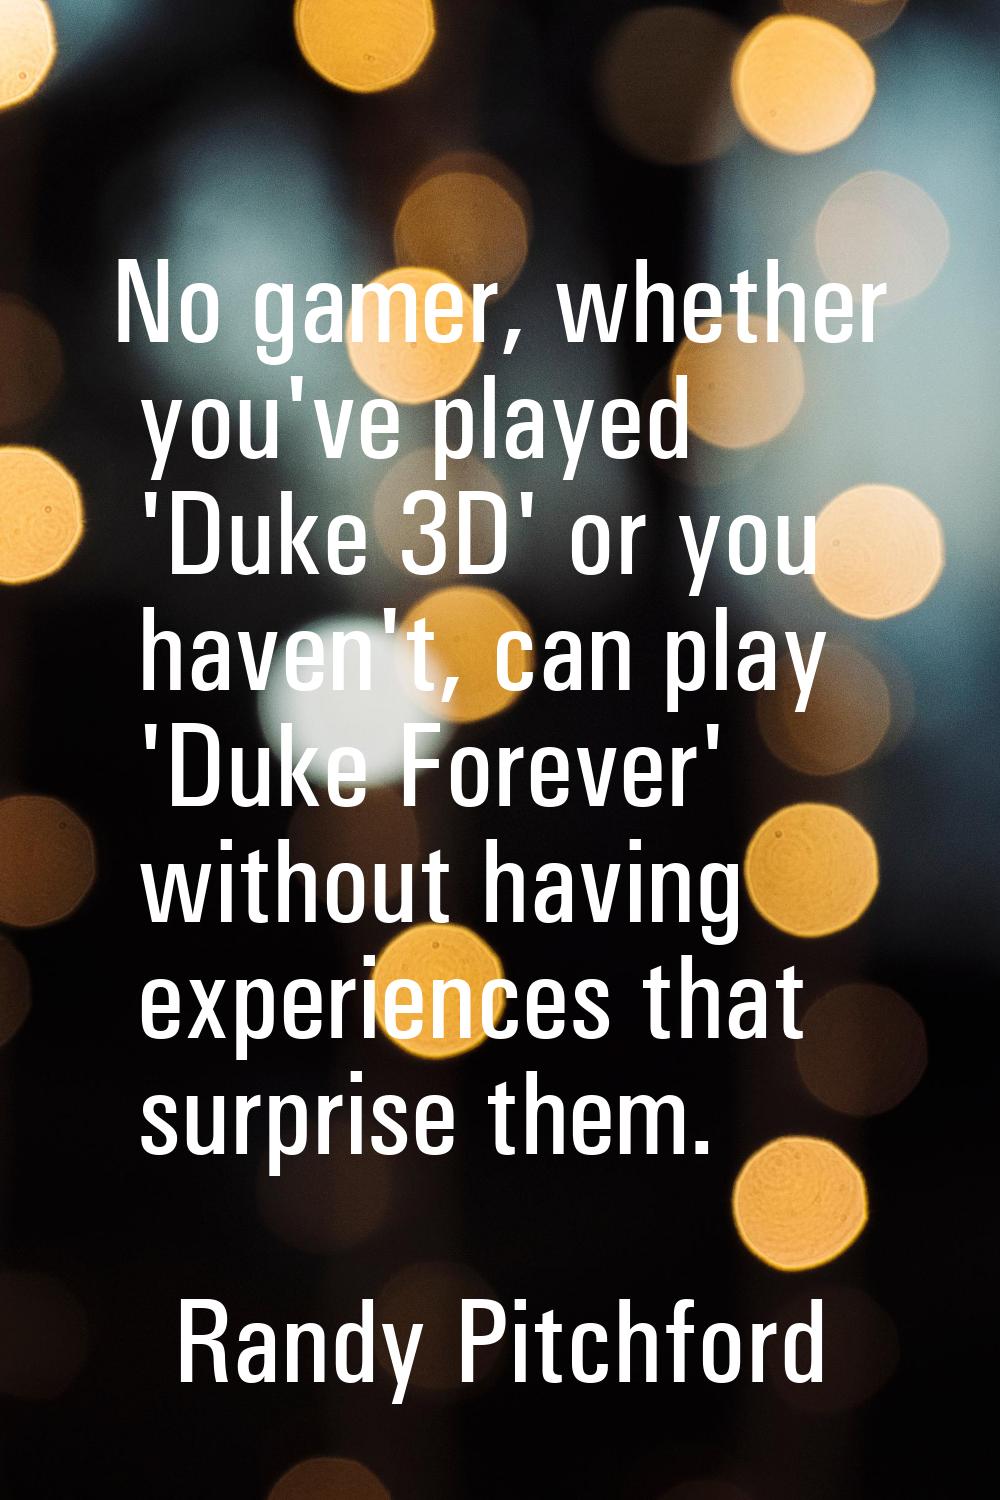 No gamer, whether you've played 'Duke 3D' or you haven't, can play 'Duke Forever' without having ex